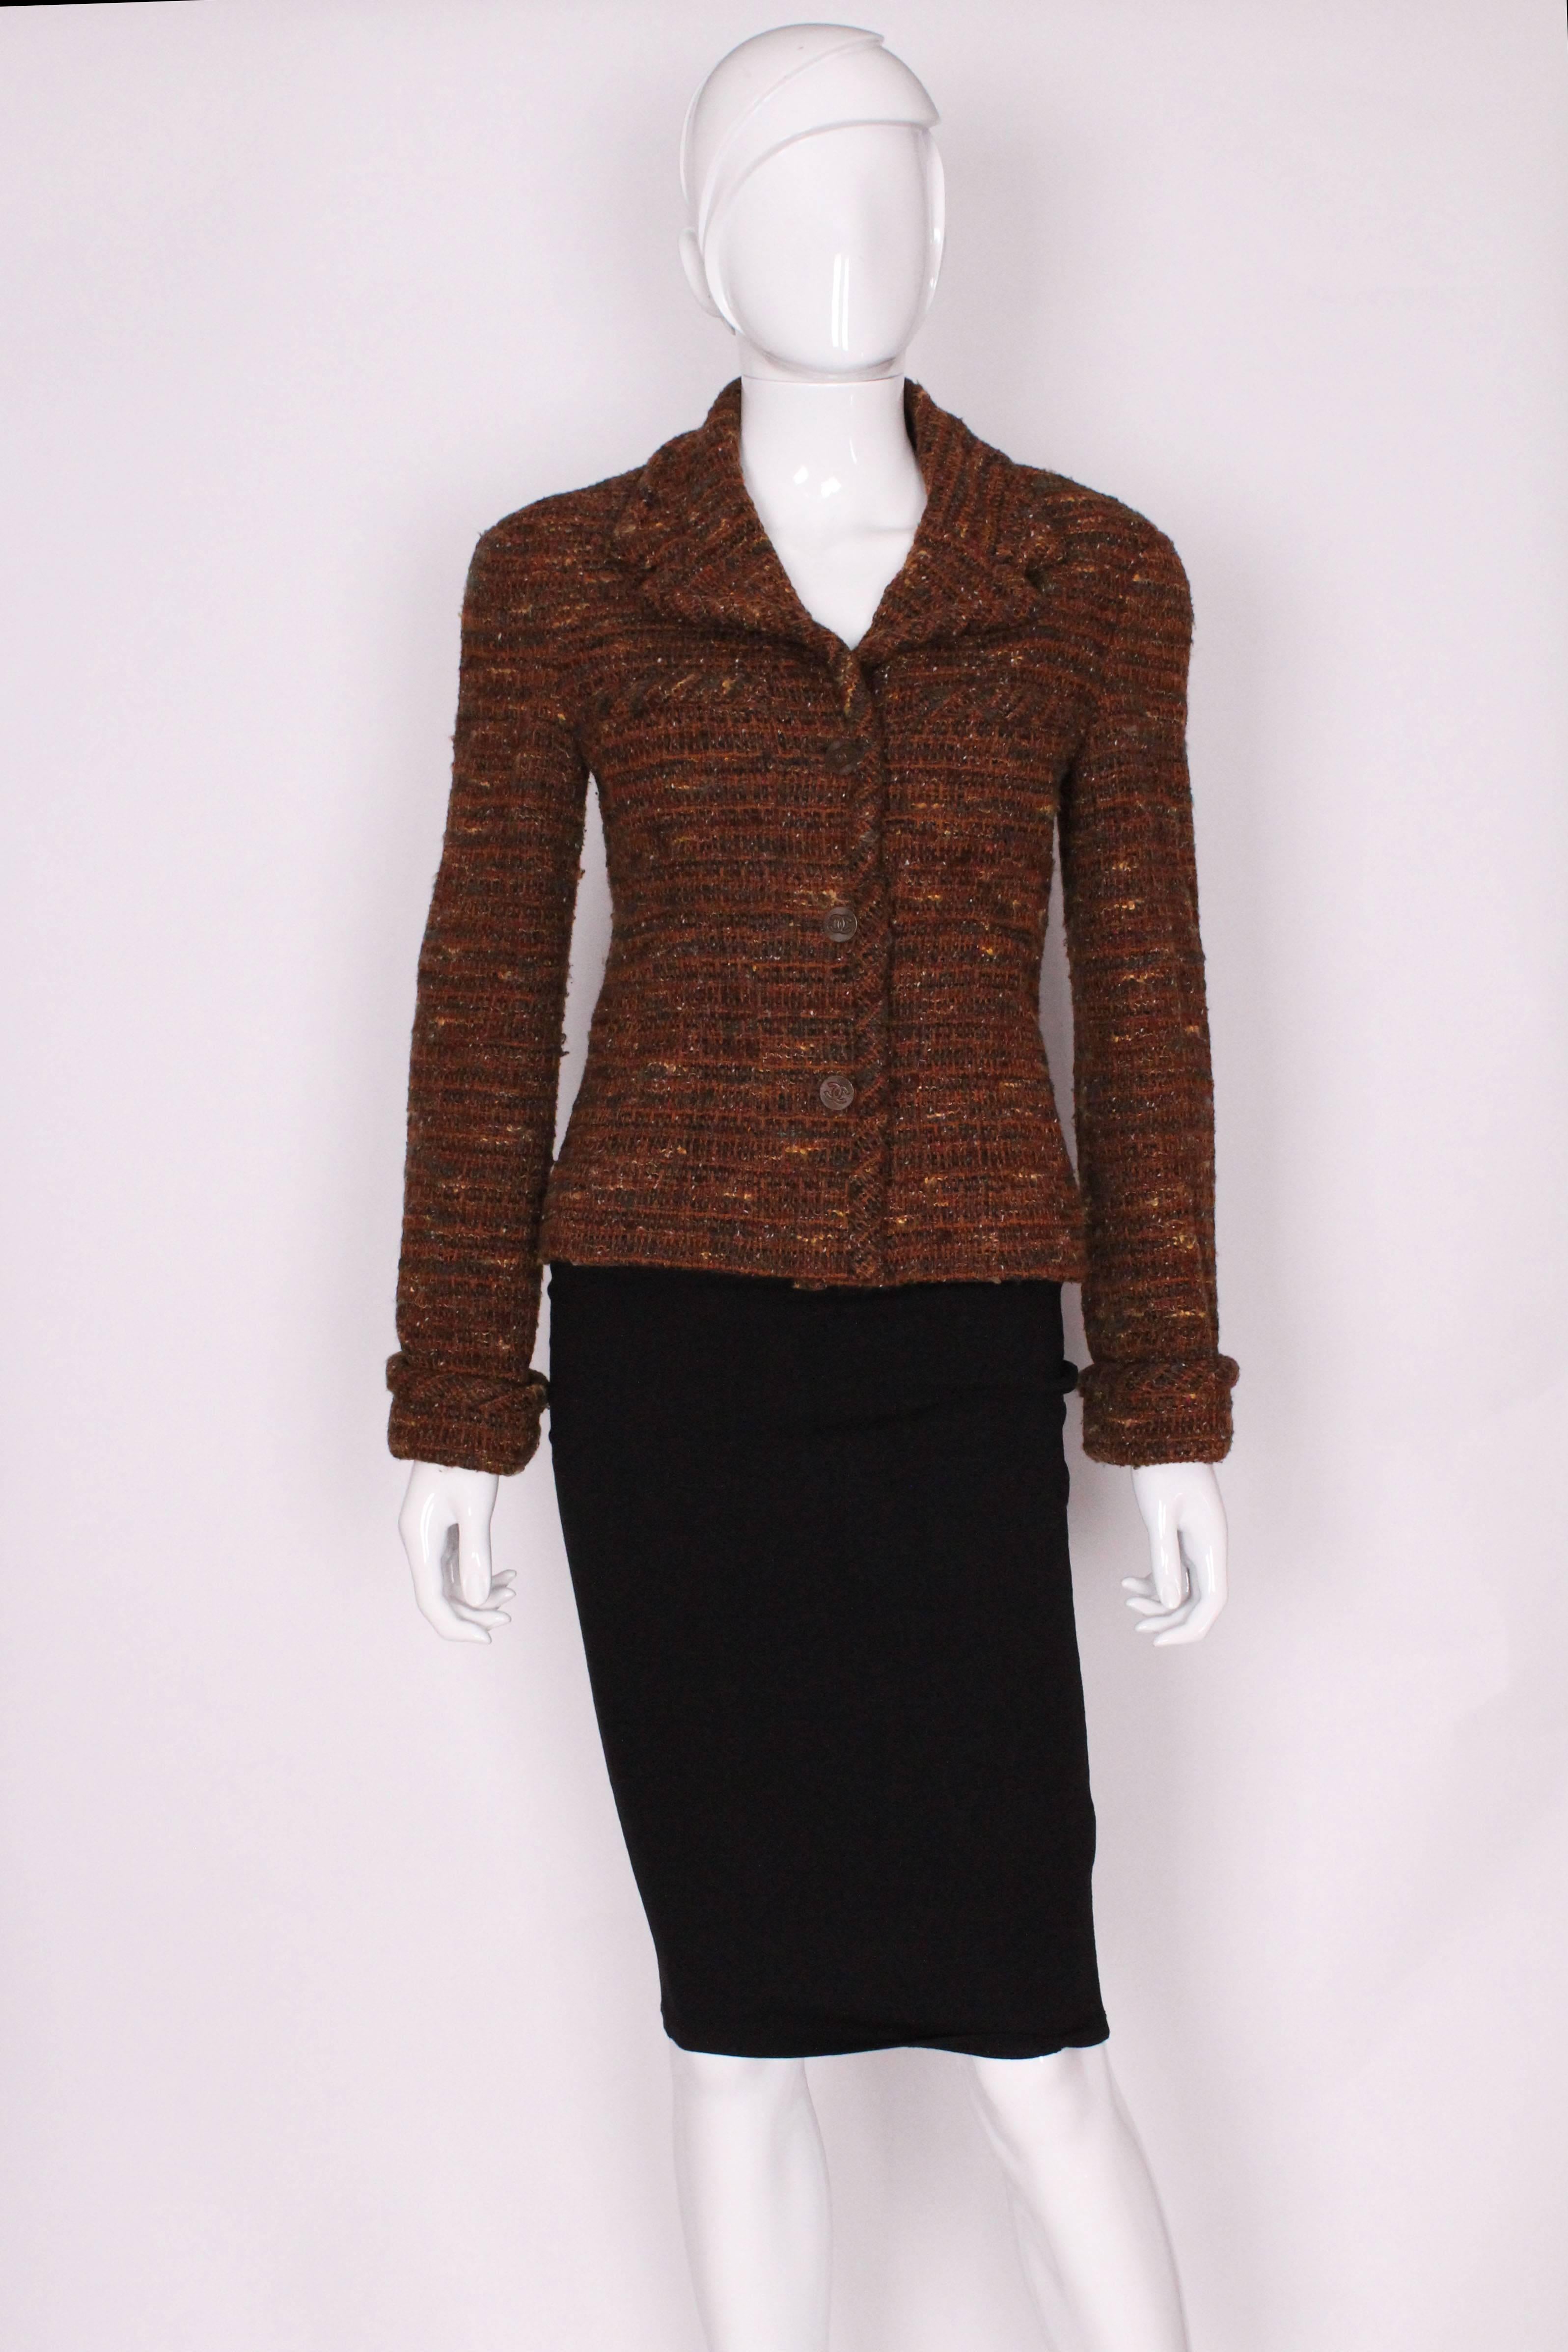 A great jacket for Fall. This jacket by Chanel  (1998A), is in a wonderful mix of Autumn colours, brown with flecks of dark brown, green ,red ,gold and white.
The outer fabric is 80% wool, 20% Acrylic, the lining is 100% silk, with a chain running